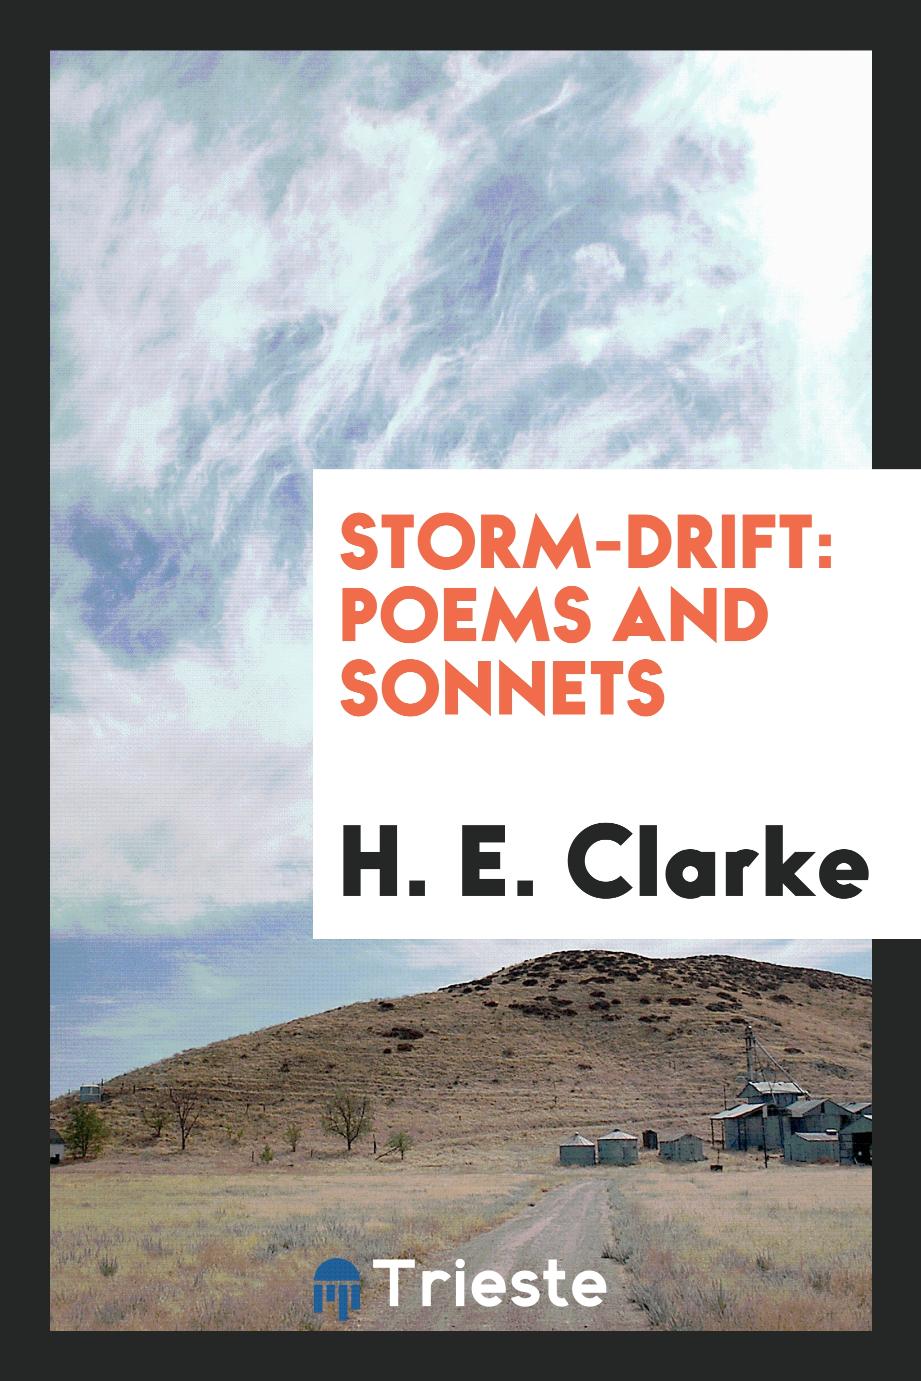 Storm-drift: poems and sonnets